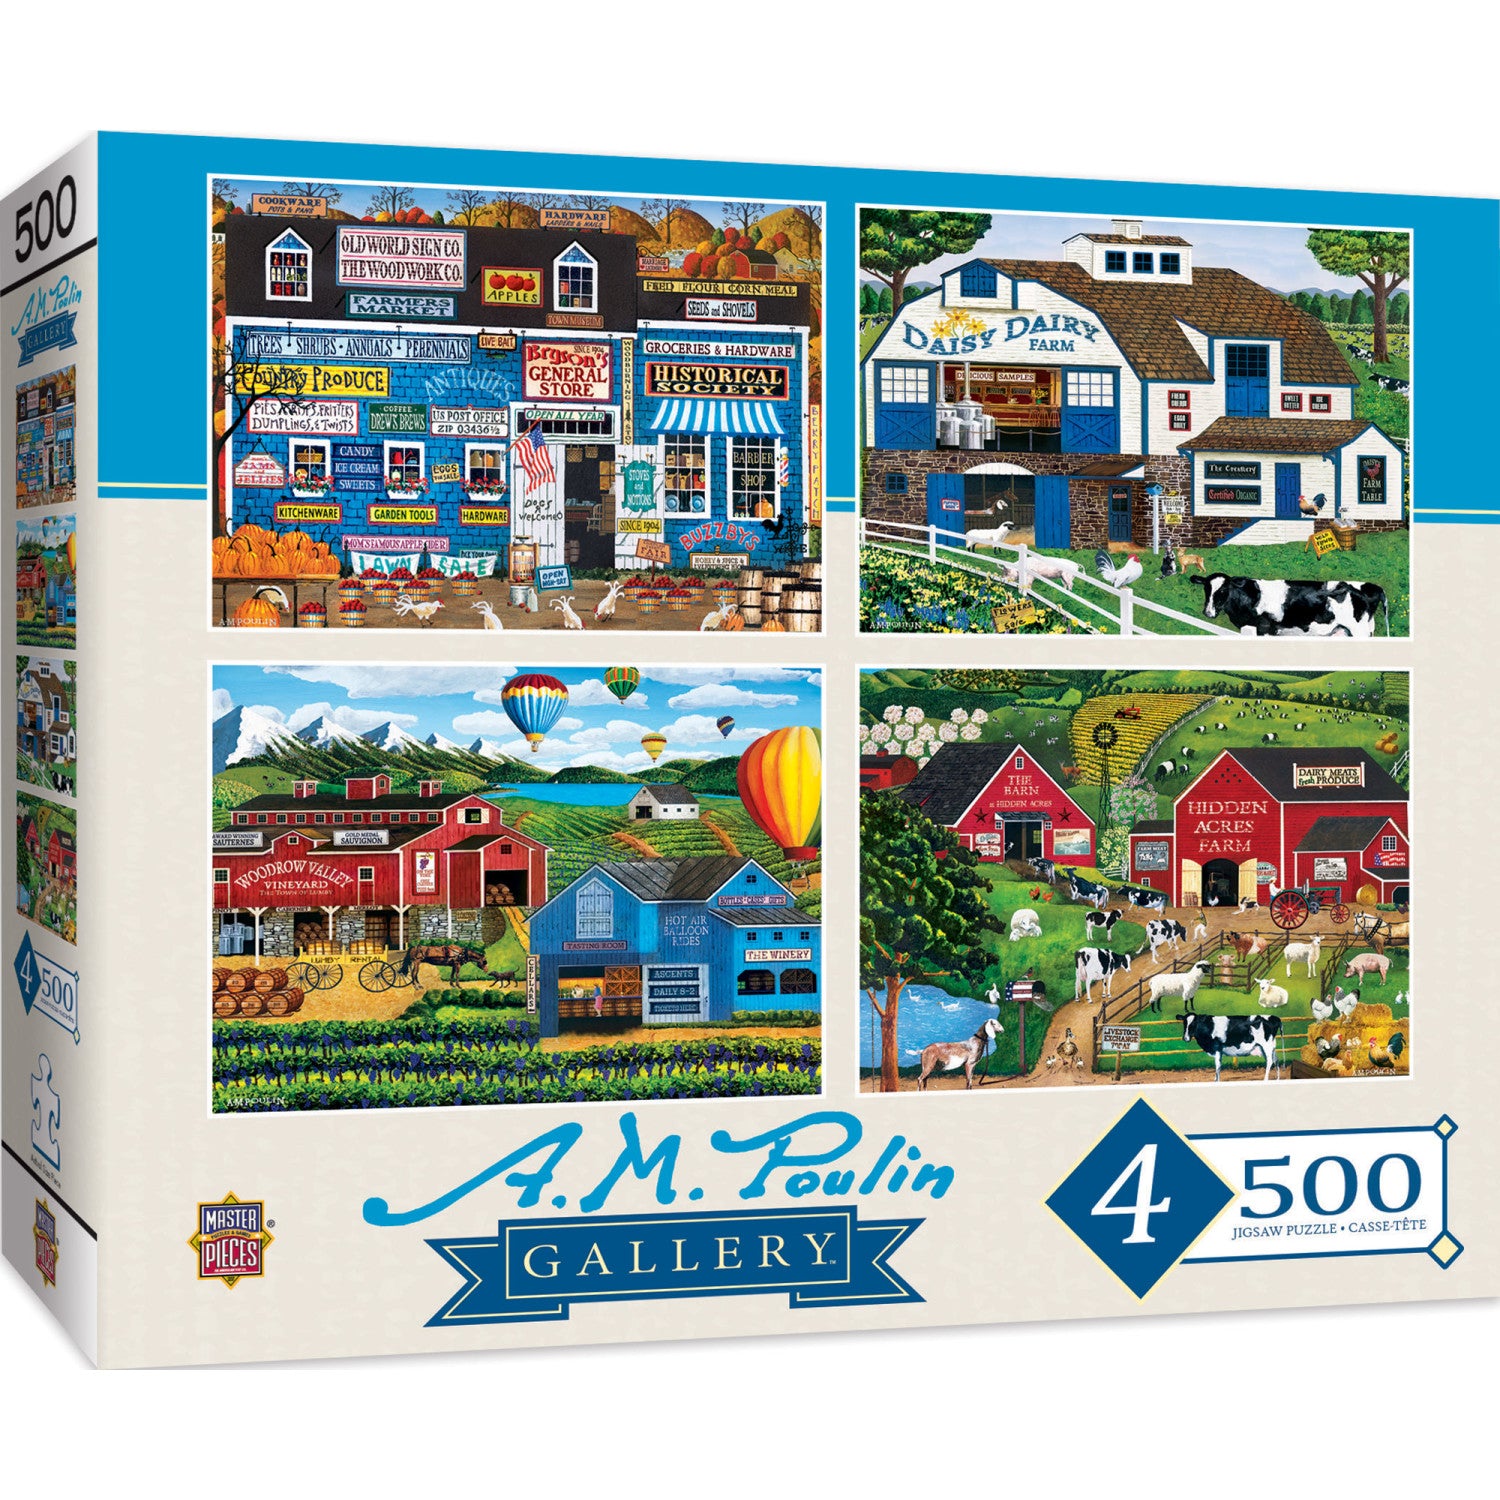 A.M. Poulin Gallery - 500 Piece Jigsaw Puzzles 4 Pack